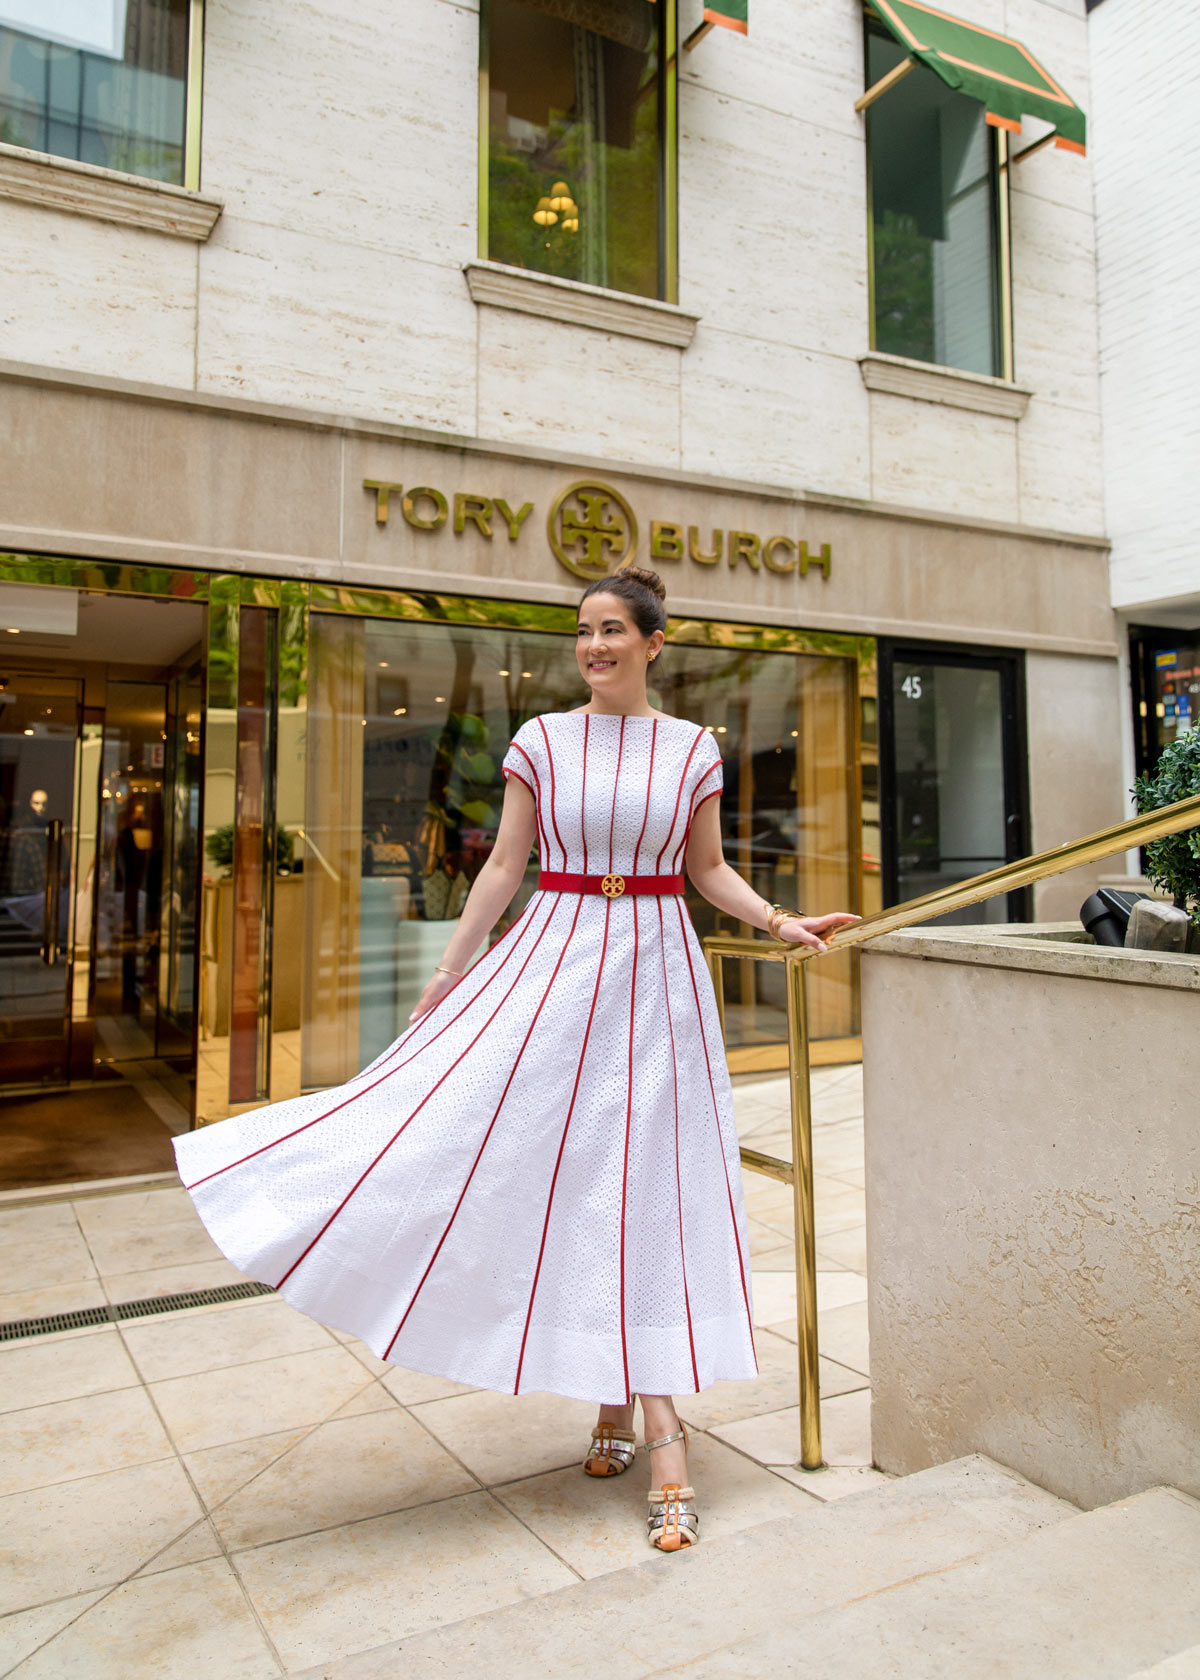 Tory Burch sale: Save big on purses, shoes, clothing, jewelry and more